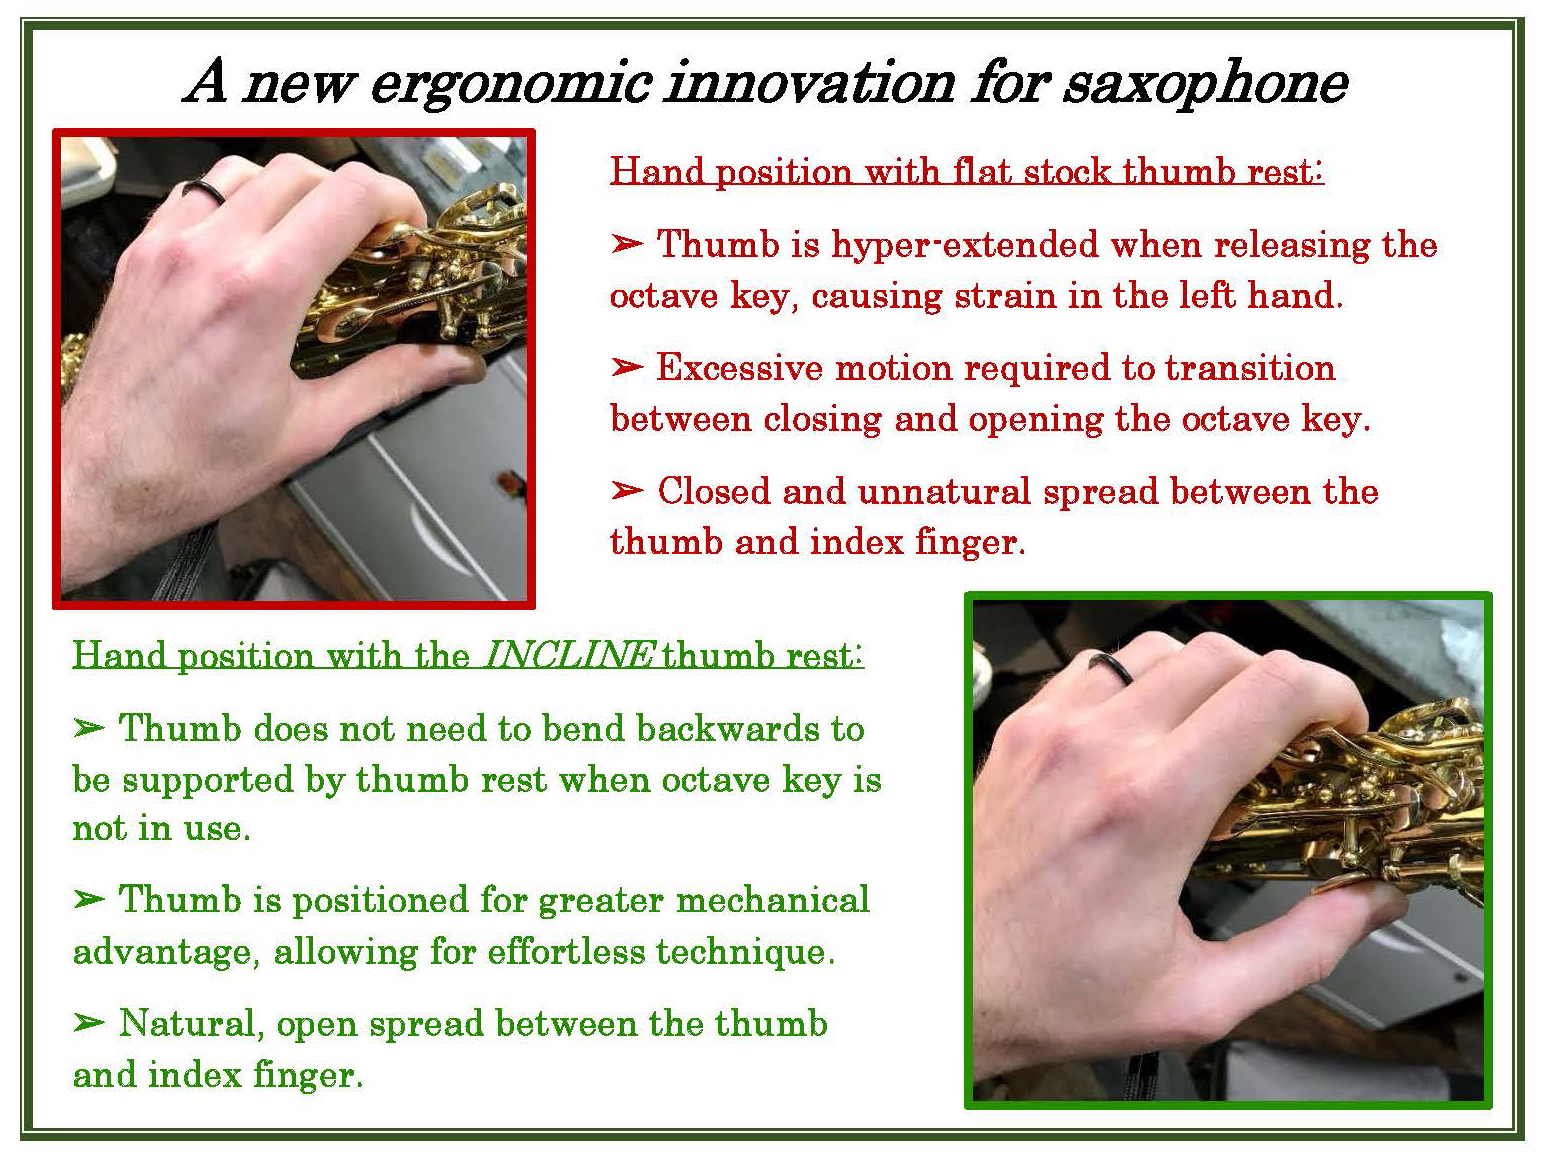 Incline Thumb Rest Ad by Peak Performance Woodwinds